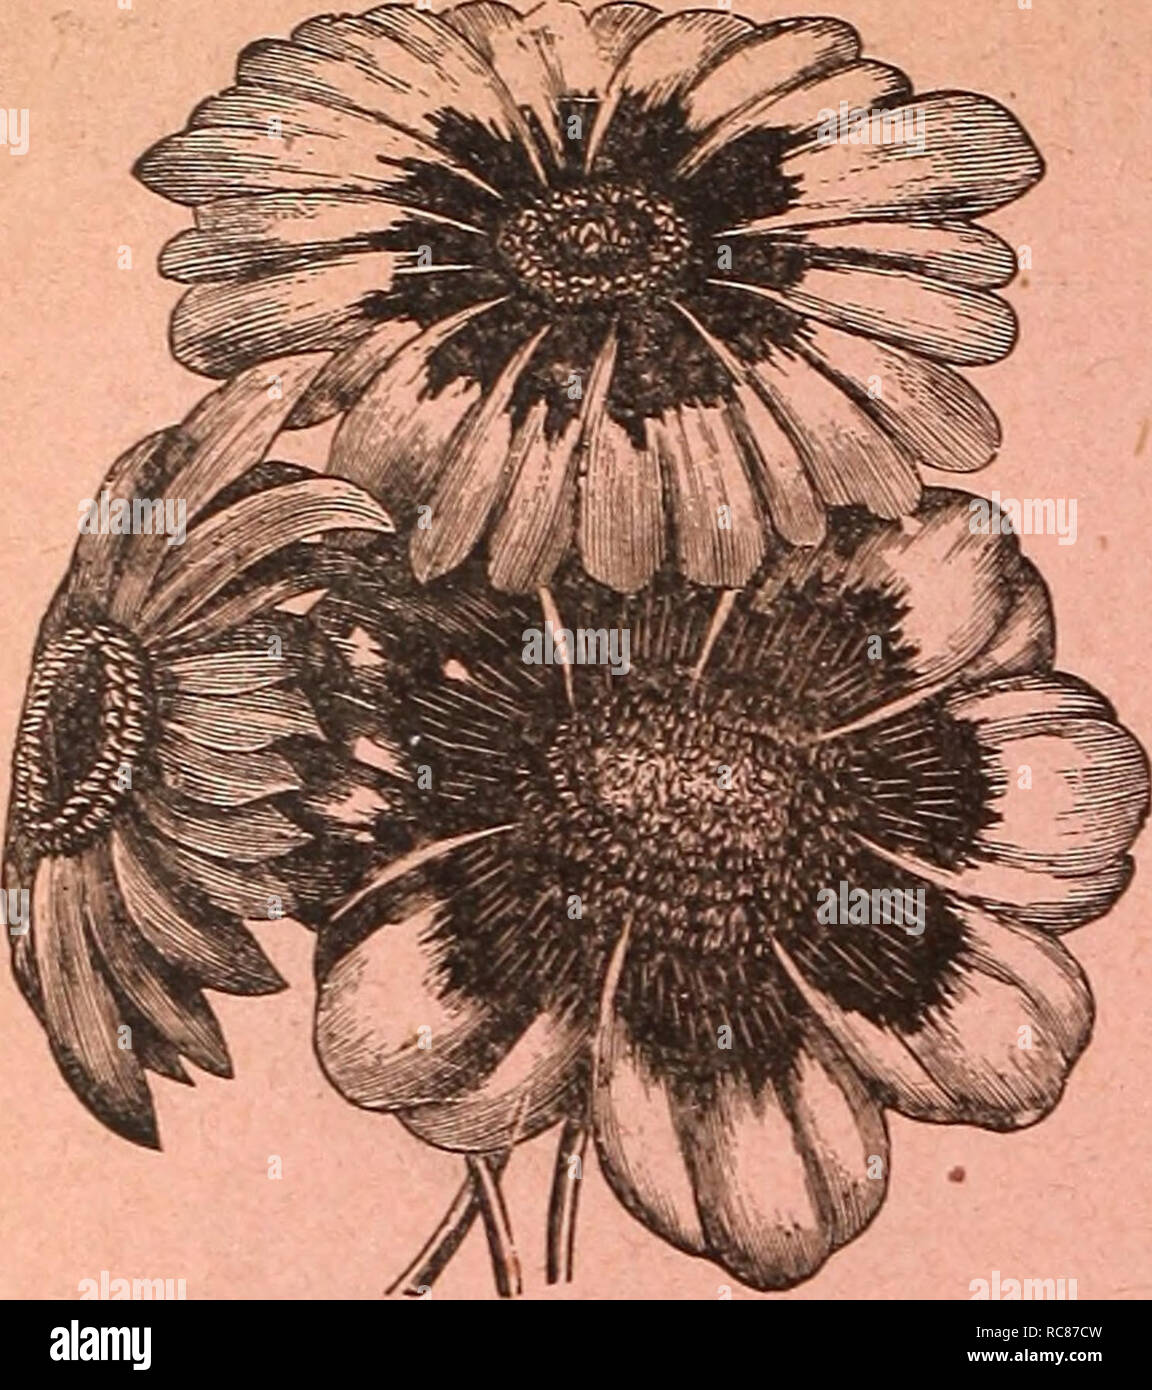 . Dreer's garden calendar : 1886. Seeds Catalogs; Nursery stock Catalogs; Gardening Catalogs; Flowers Seeds Catalogs; Gardening Equipment and supplies Catalogs. VI DREER'S GARDEN CALENDAR.. CHRYSANTHEMUM SEGETUM GRANDIFLORUM. No. 5495. Beautiful large blooms, of a bright sulphur- yellow color, measurinc; 2 to 24 inches in diameter and borne profusely. Per pkt., 15 cts. MIGNONETTE. MACHET. No. 610S. Well adapted for pot culture, as it comes per- fectly true from seed. The dwarf and vigorous plants are of pyramidal growth and furnished with very thick, dark green leaves, and throw up numerous fl Stock Photo